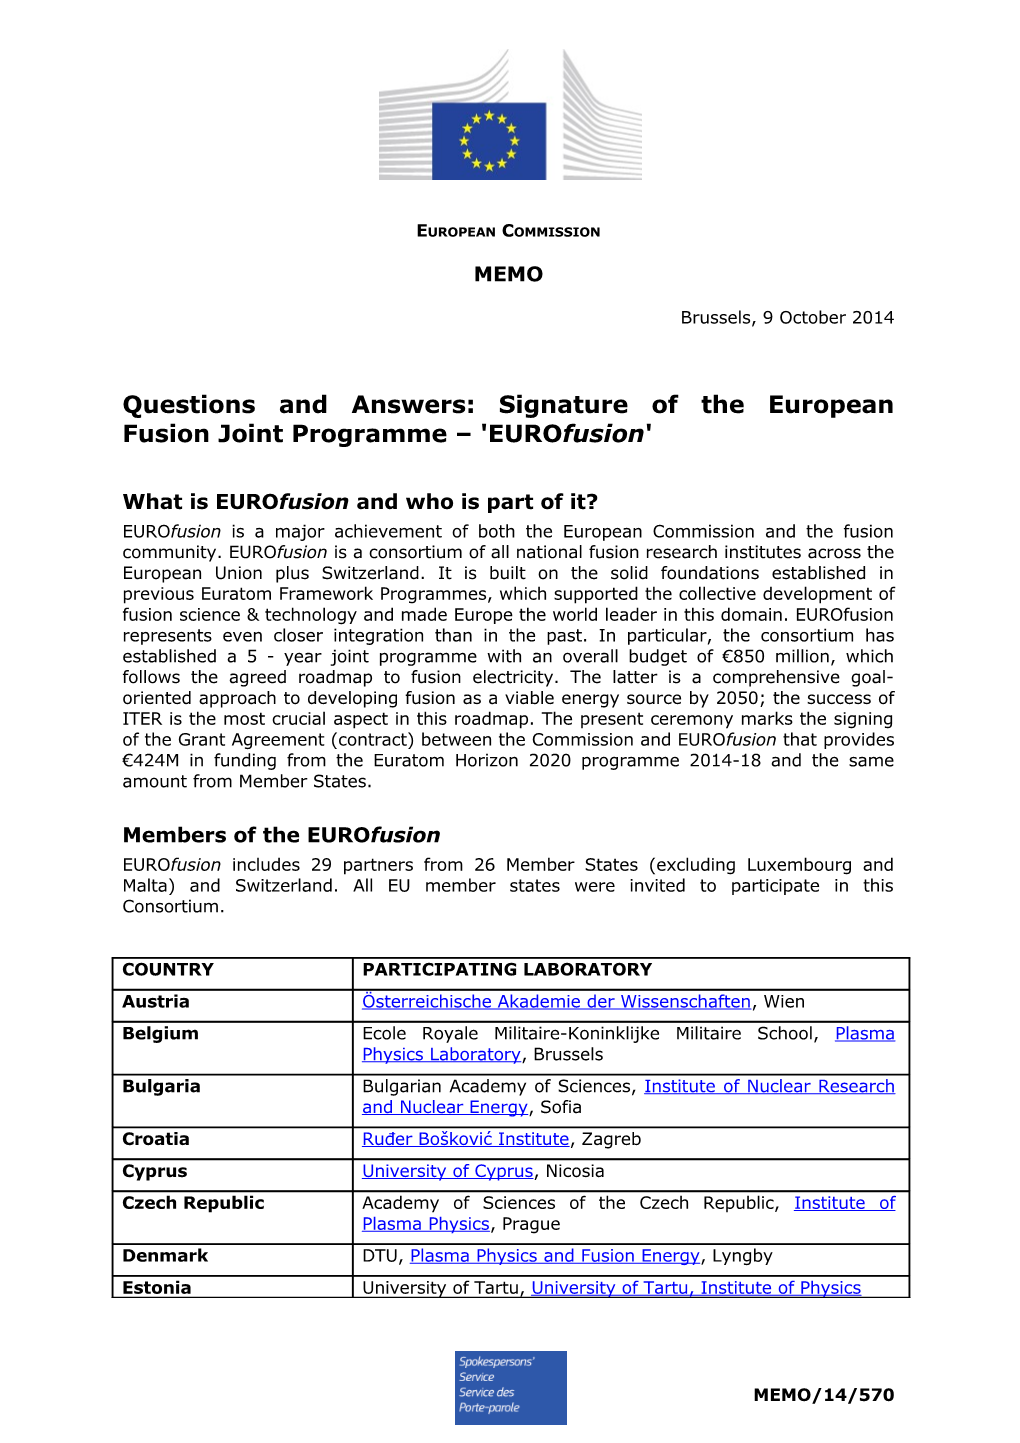 Questions and Answers: Signature of the European Fusion Joint Programme 'Eurofusion'